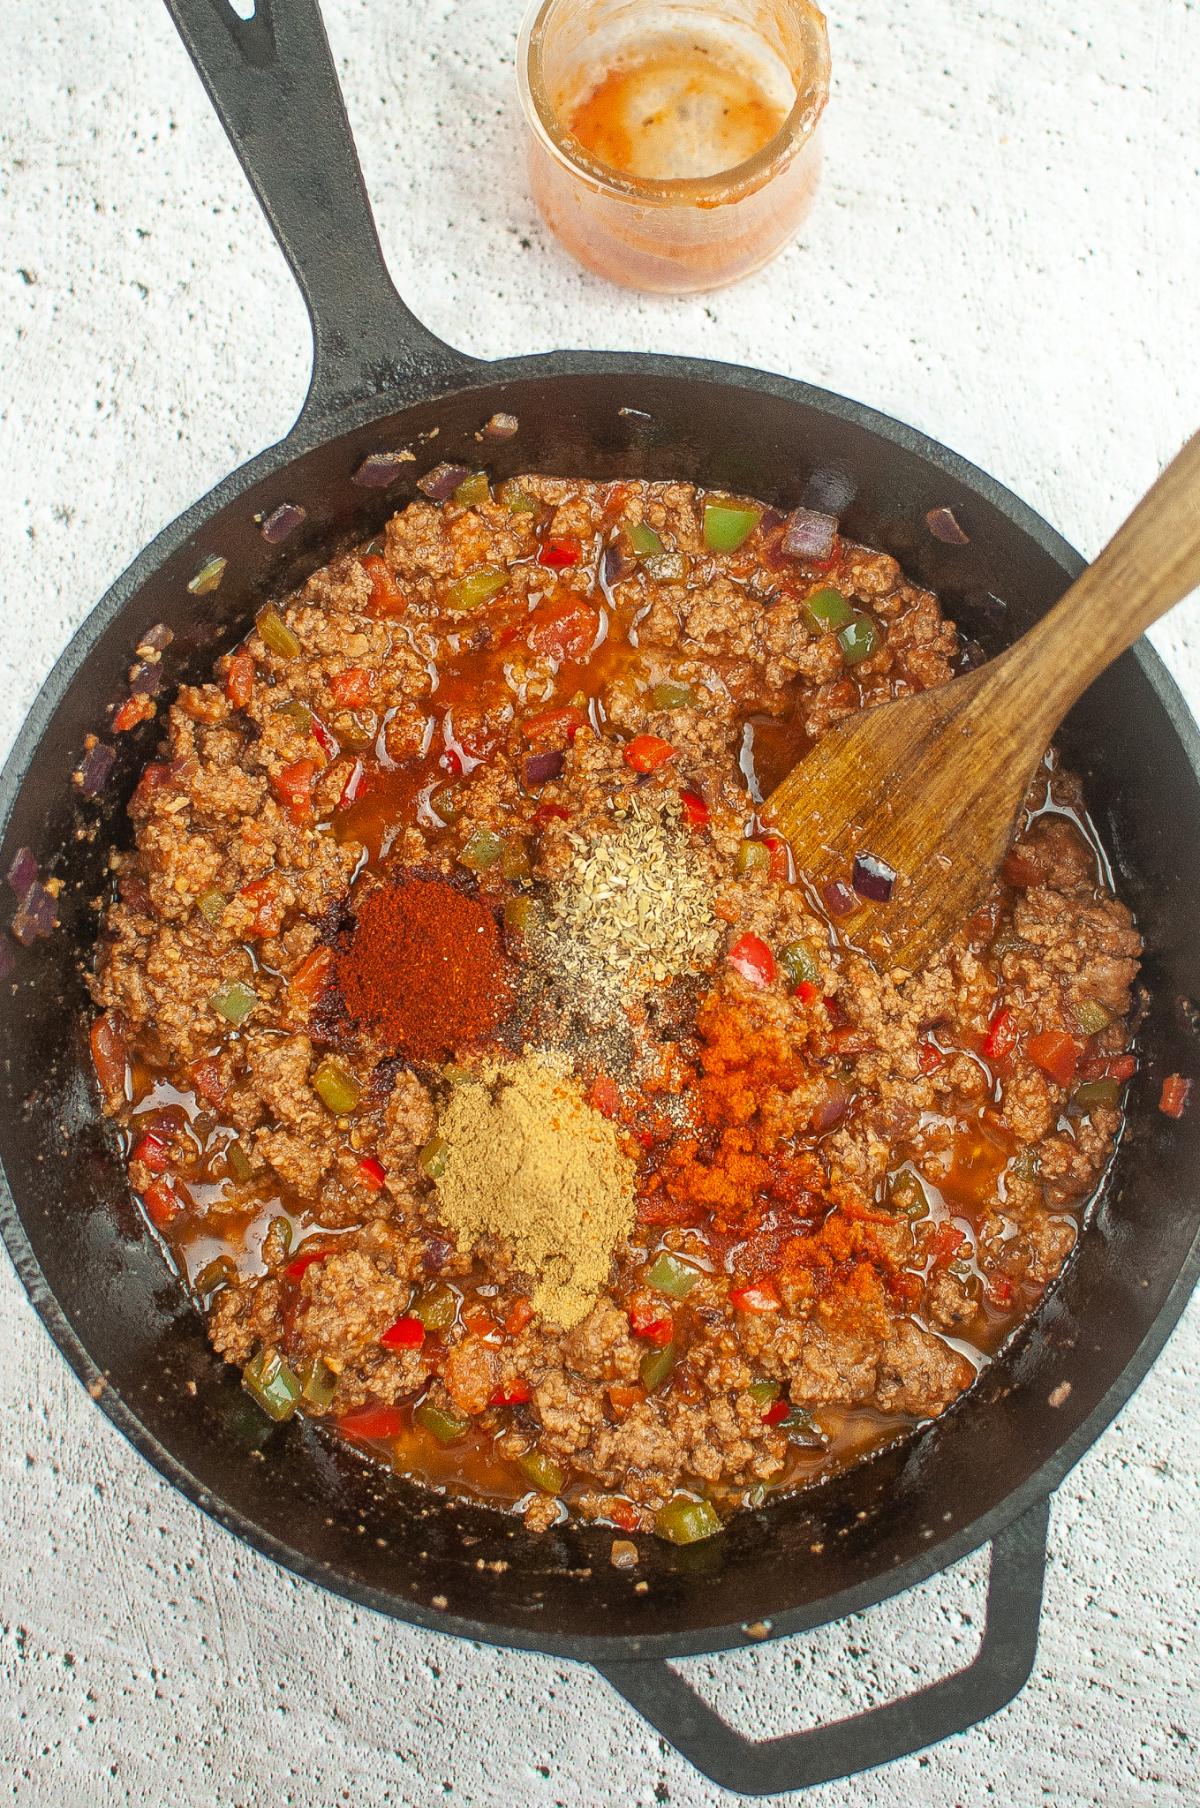 Spices are added to the ground beef mixture.